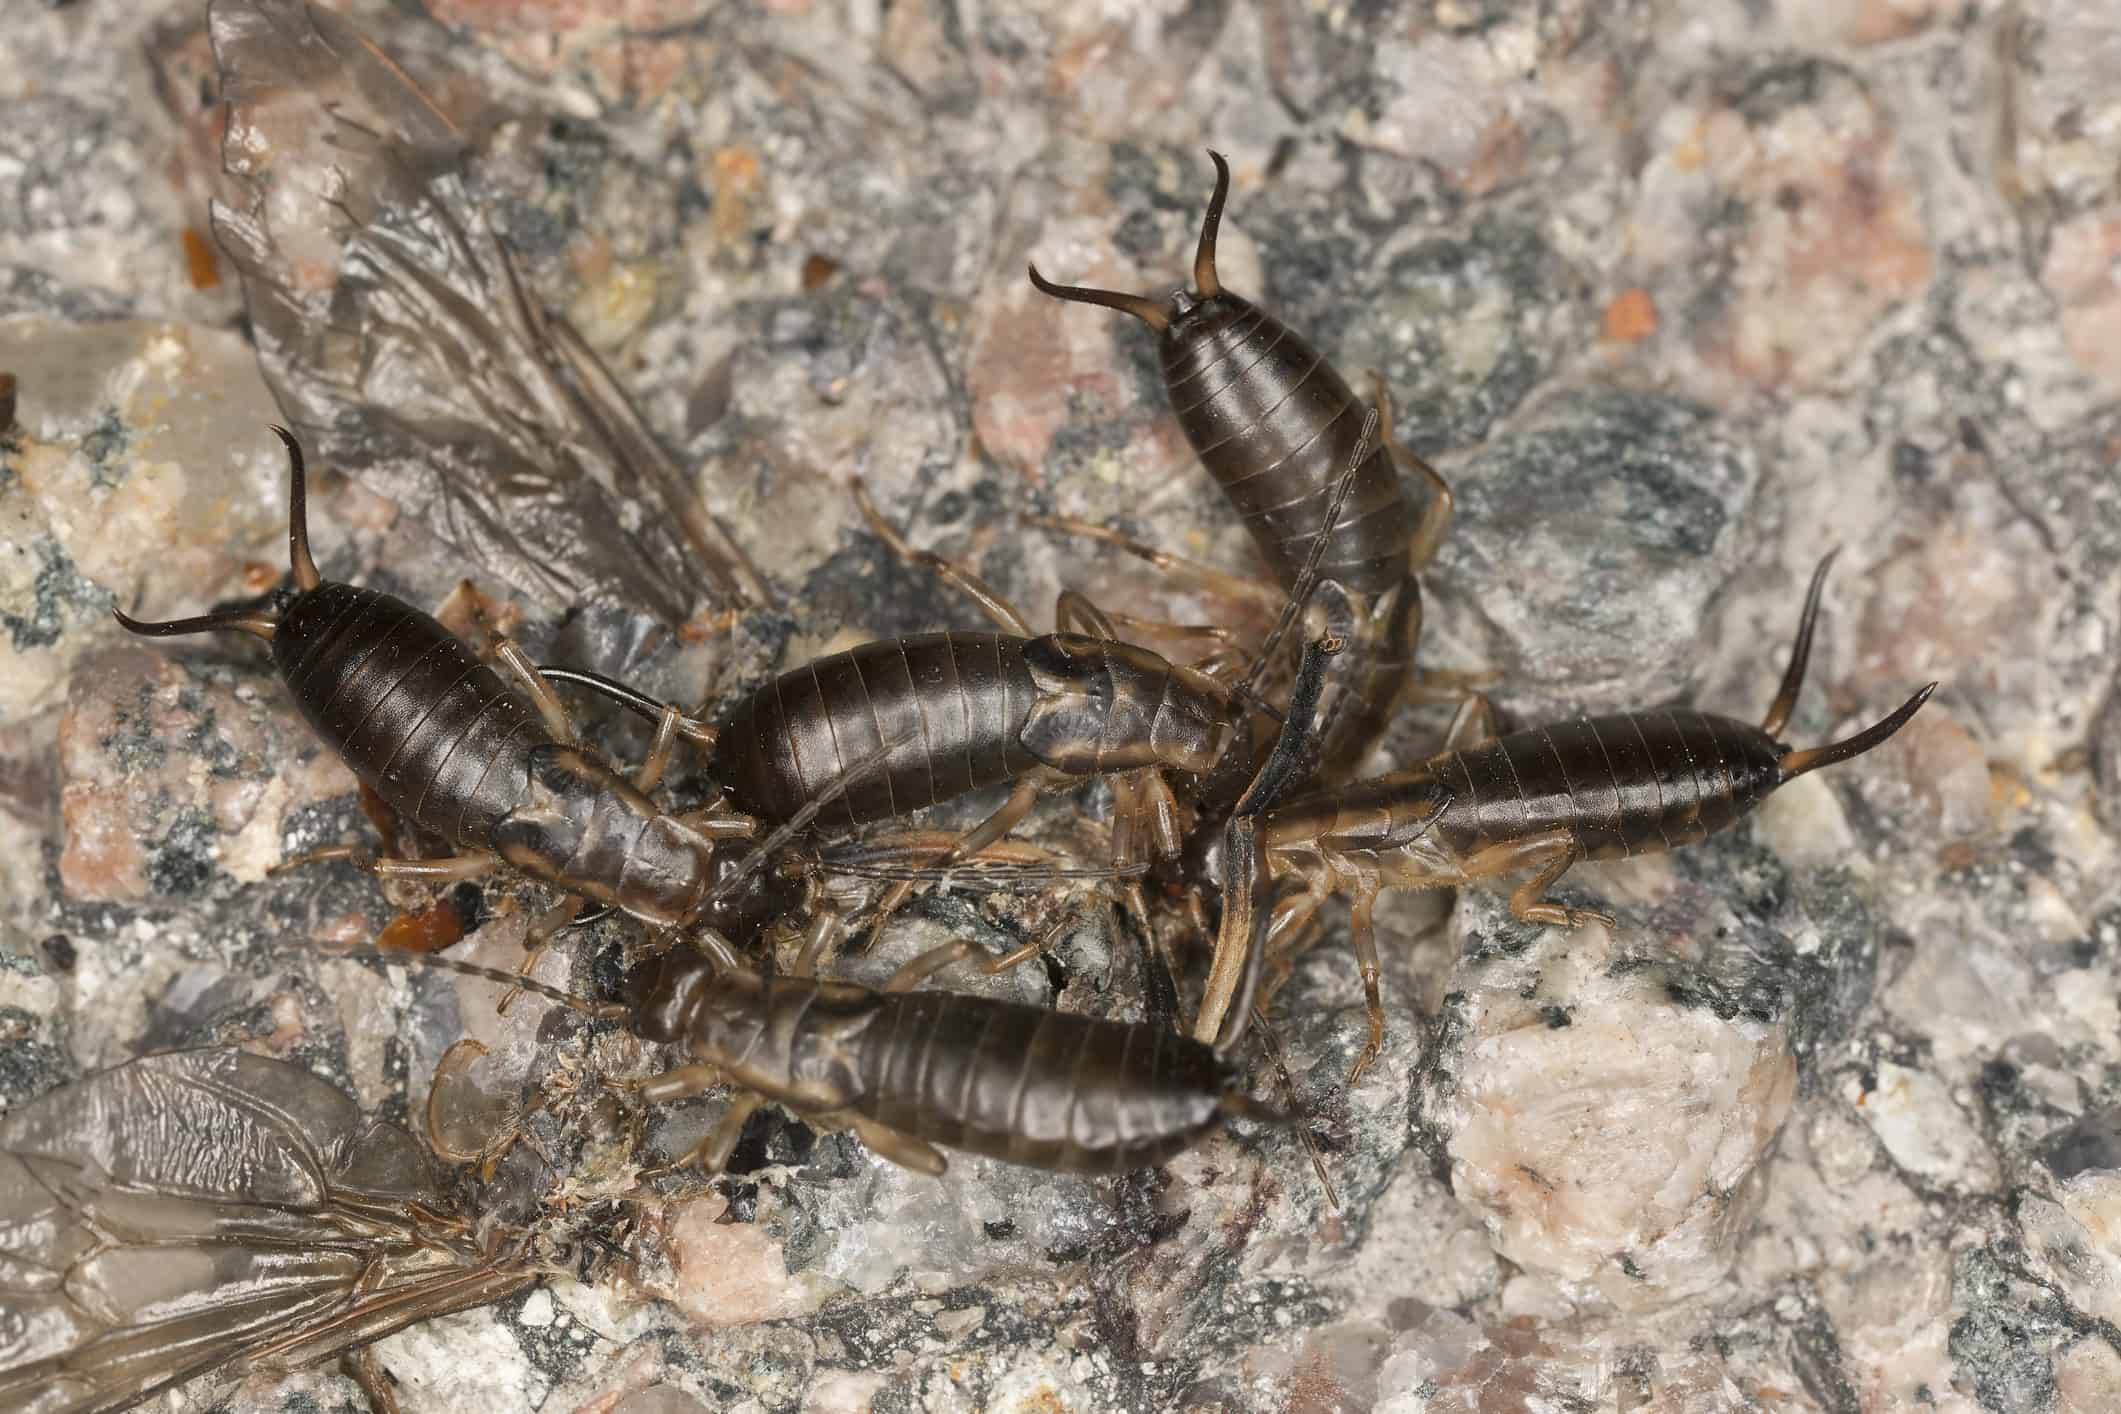 How Can I Tell If I Have an Earwig Infestation?